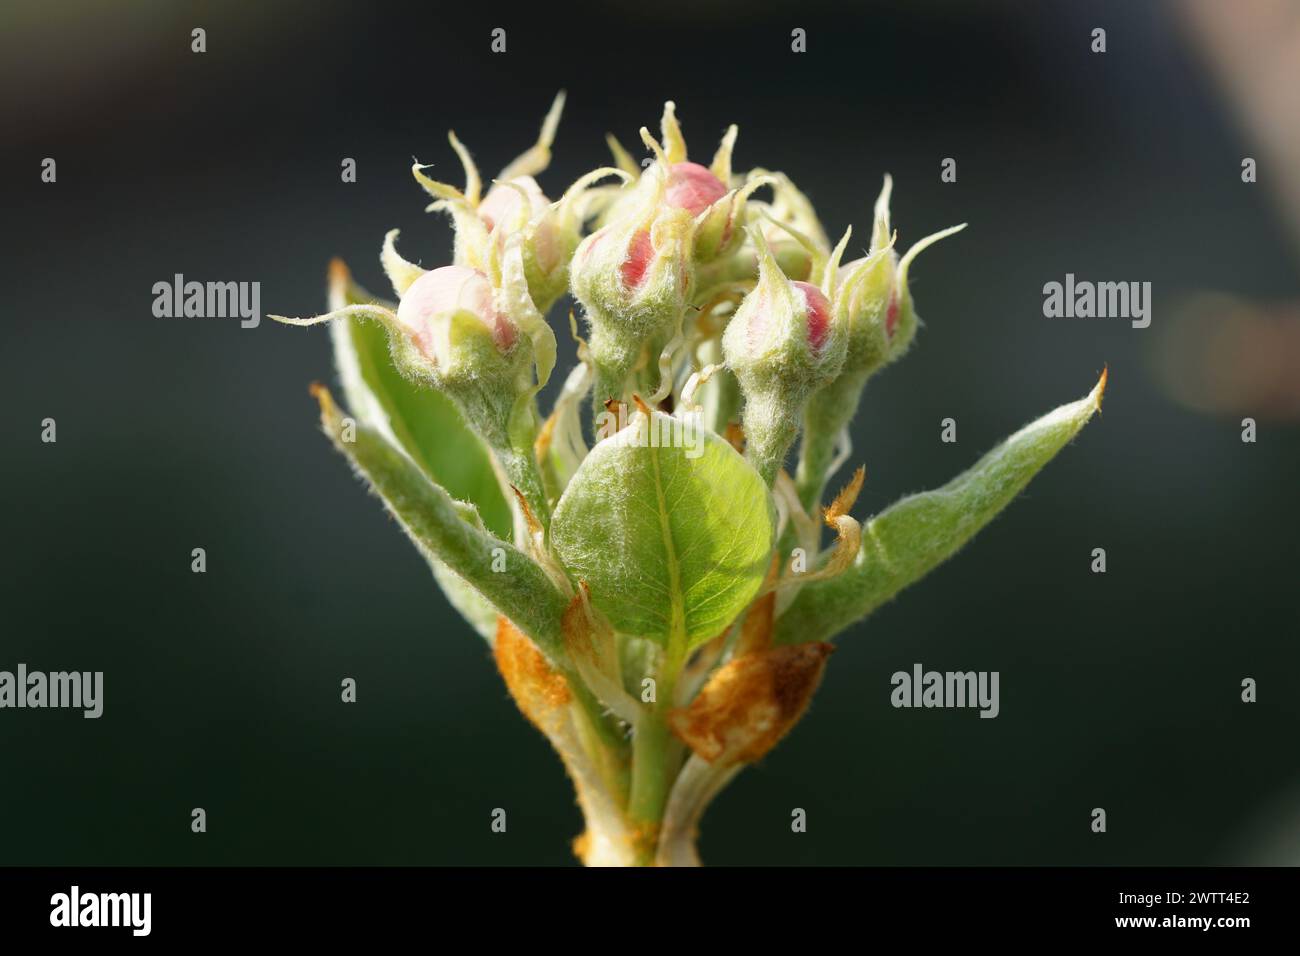 Fruit buds of the Pear variety Nordhäuser Winterforelle Stock Photo